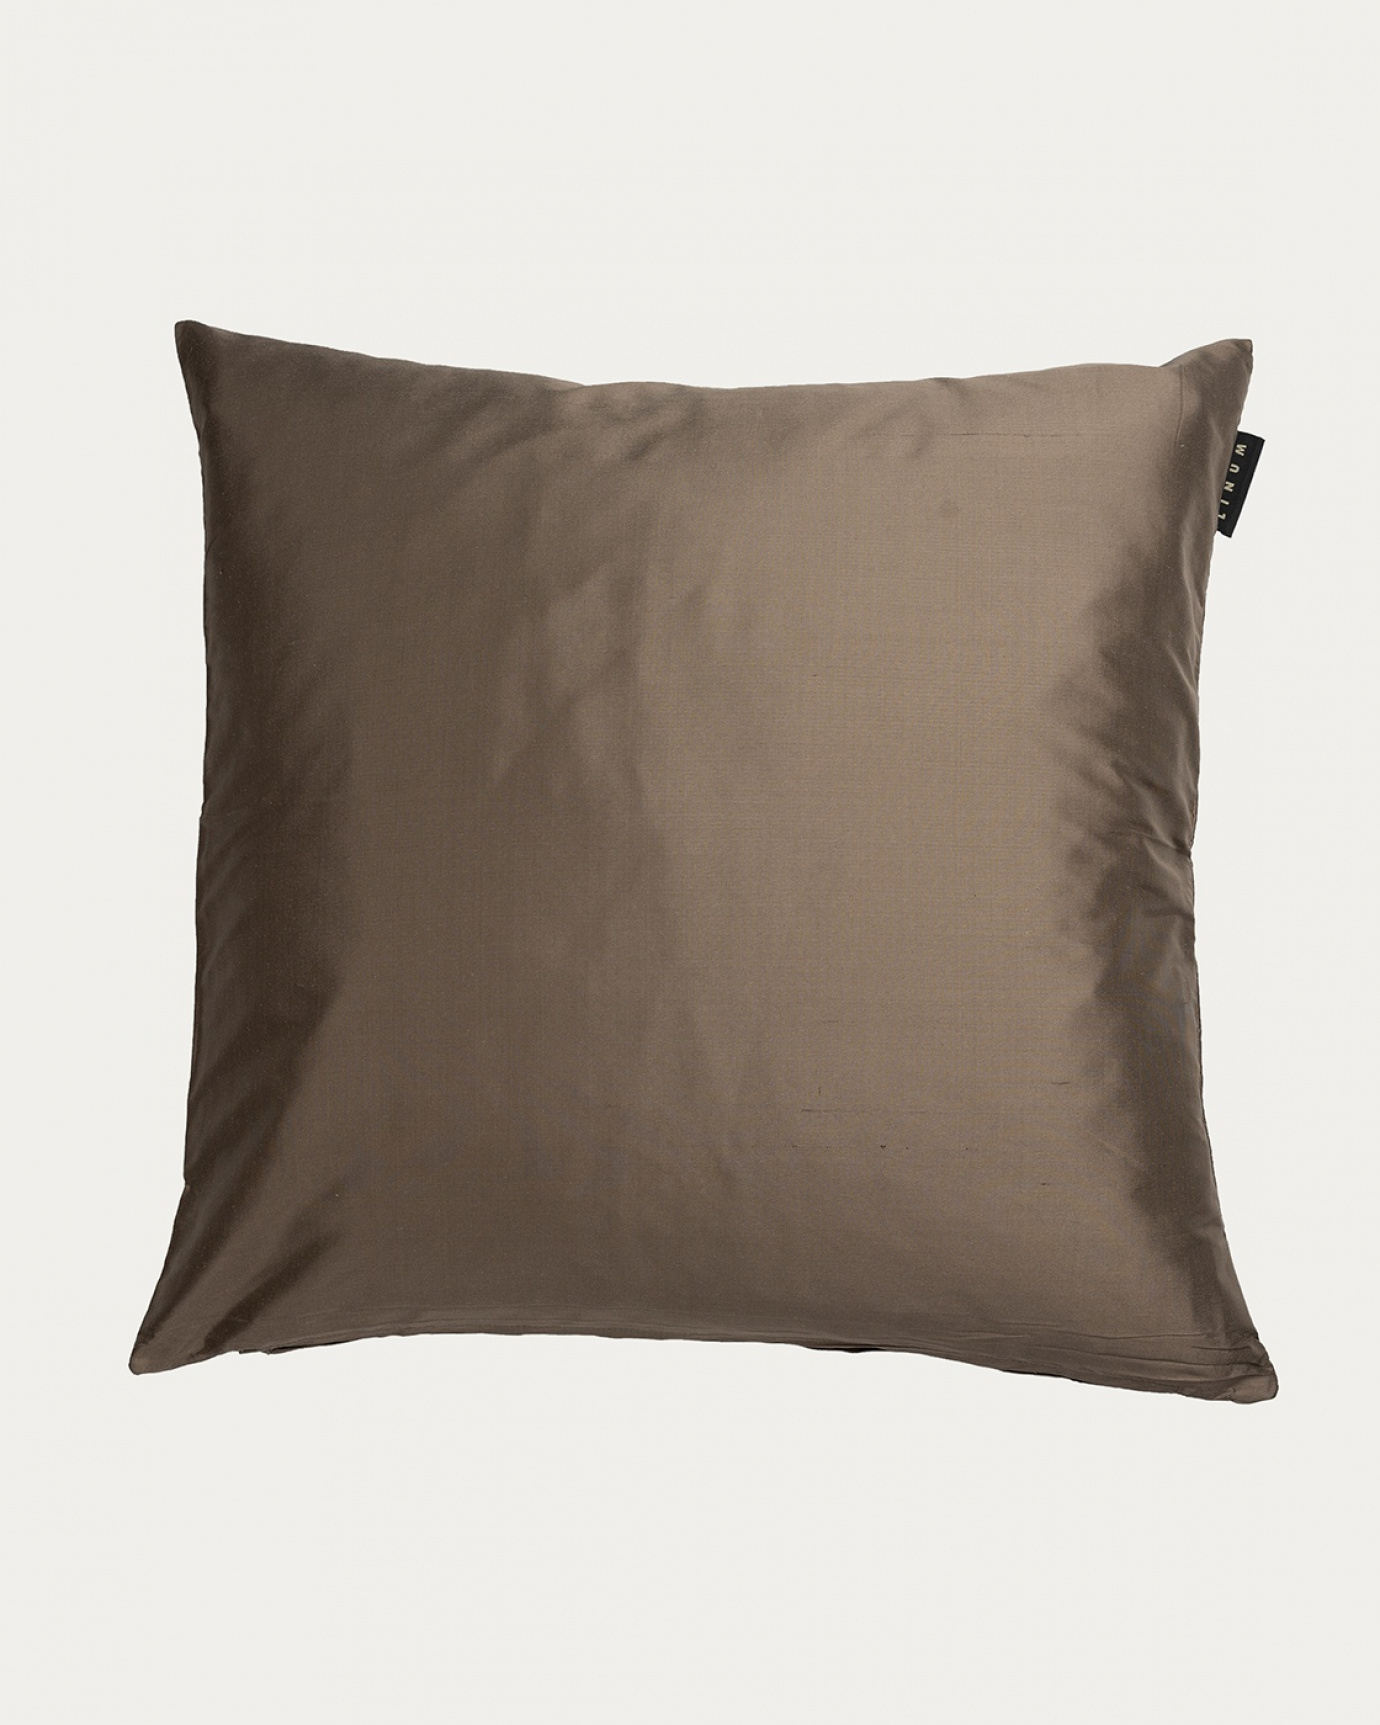 Product image dark mole brown SILK cushion cover made of 100% dupion silk that gives a nice lustre from LINUM DESIGN. Size 50x50 cm.